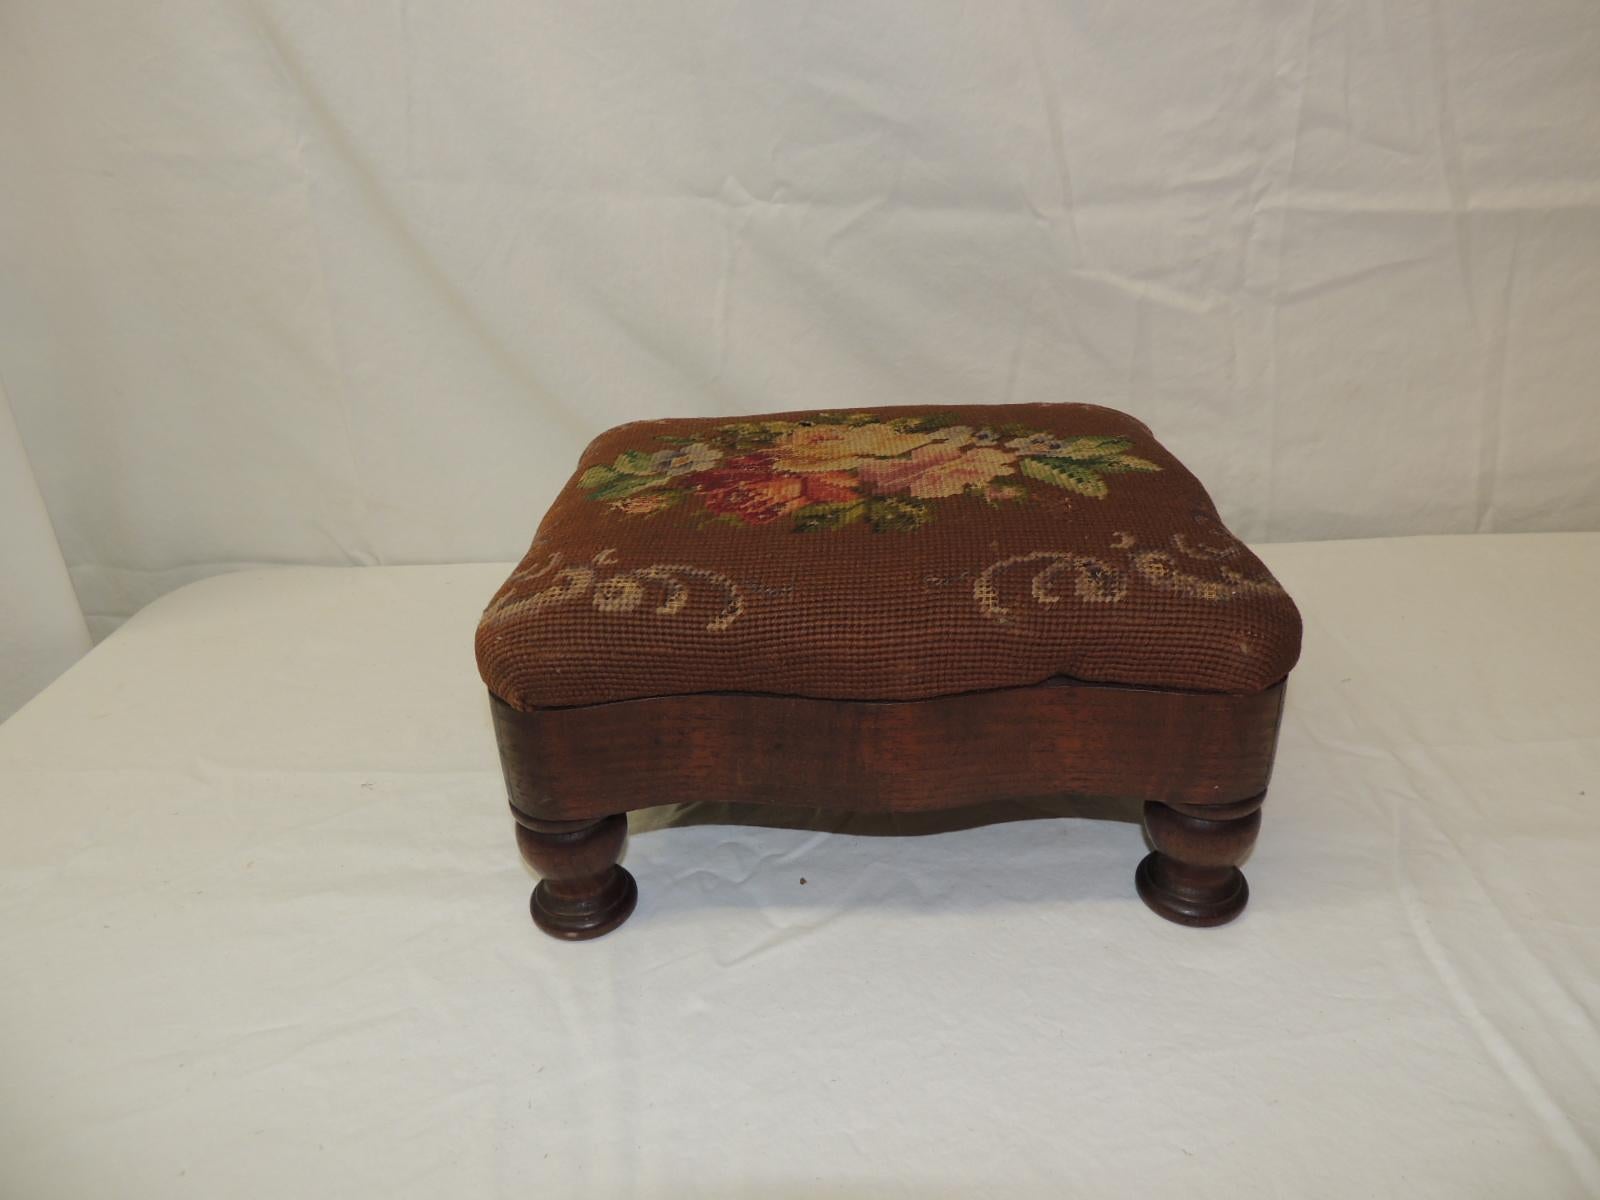 Vintage Empire style needlepoint floral tapestry footstool.
Empire style footstool stamped October 13 1927
Size: 12